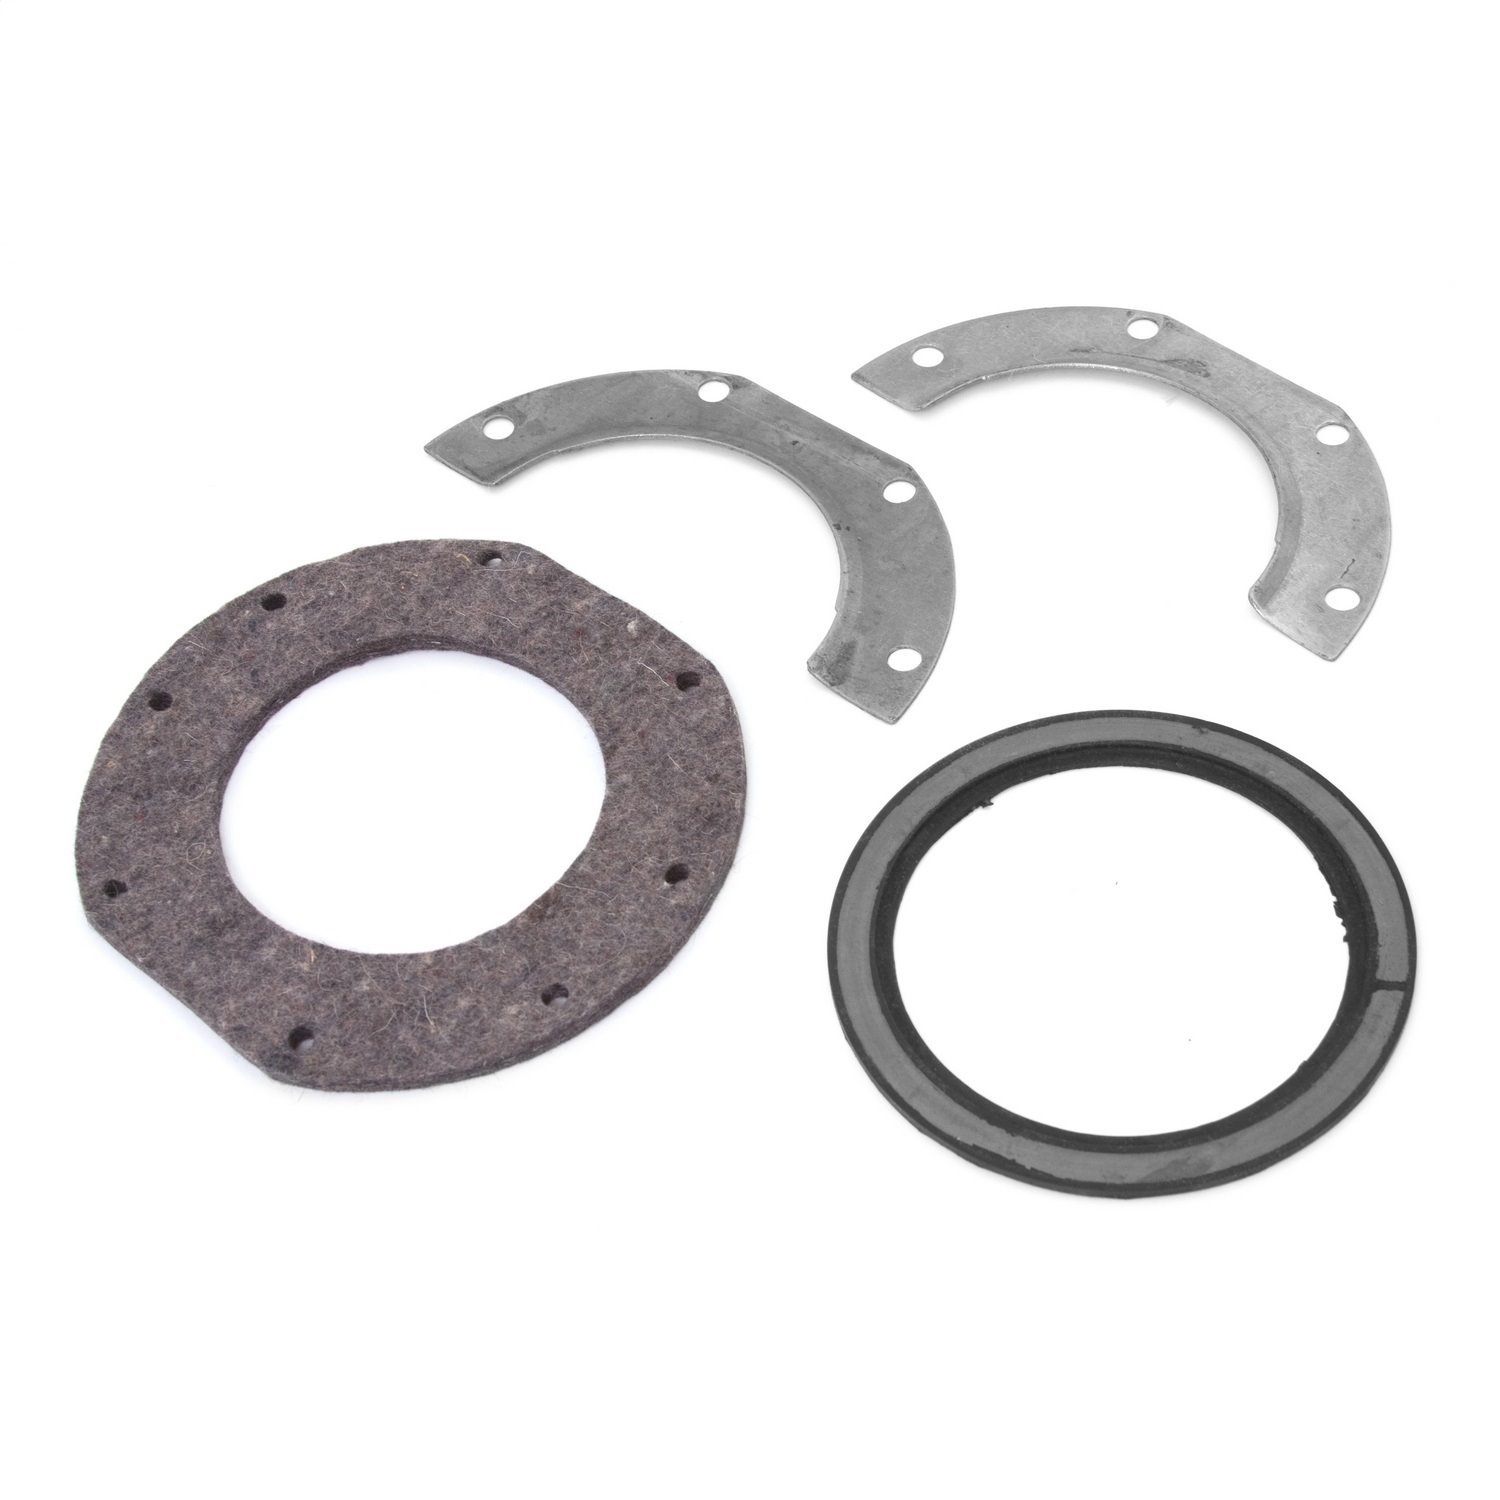 Replacement steering knuckle seal kit from Omix-ADA for Dana 25 and for Dana 27 axles., Fits left or right sides.